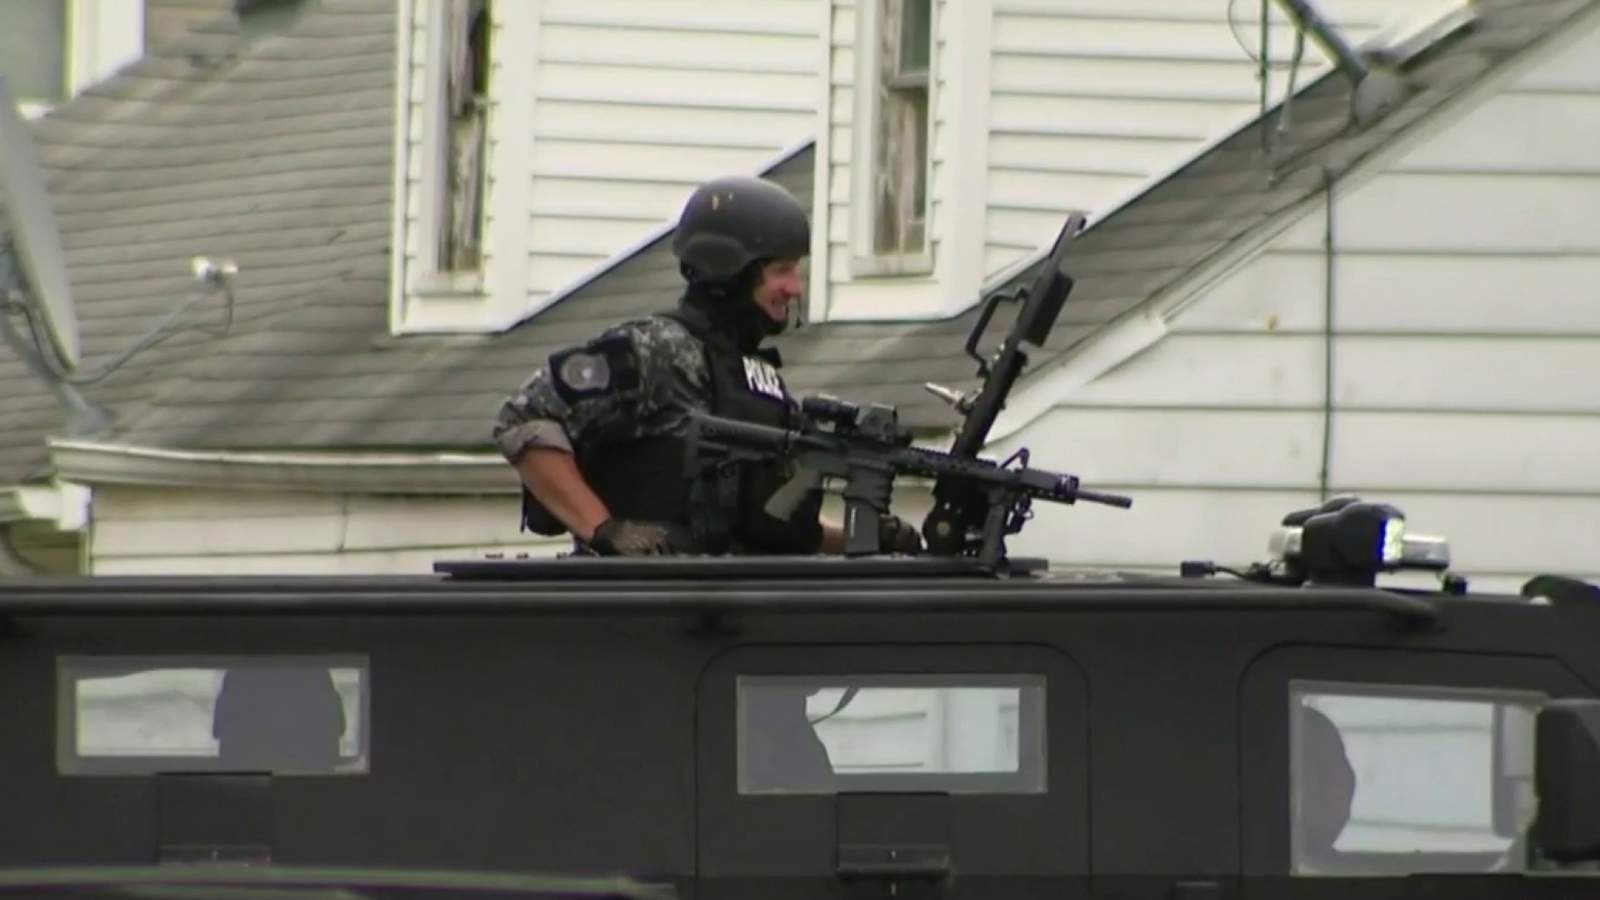 Standoff with Warren police ends peacefully